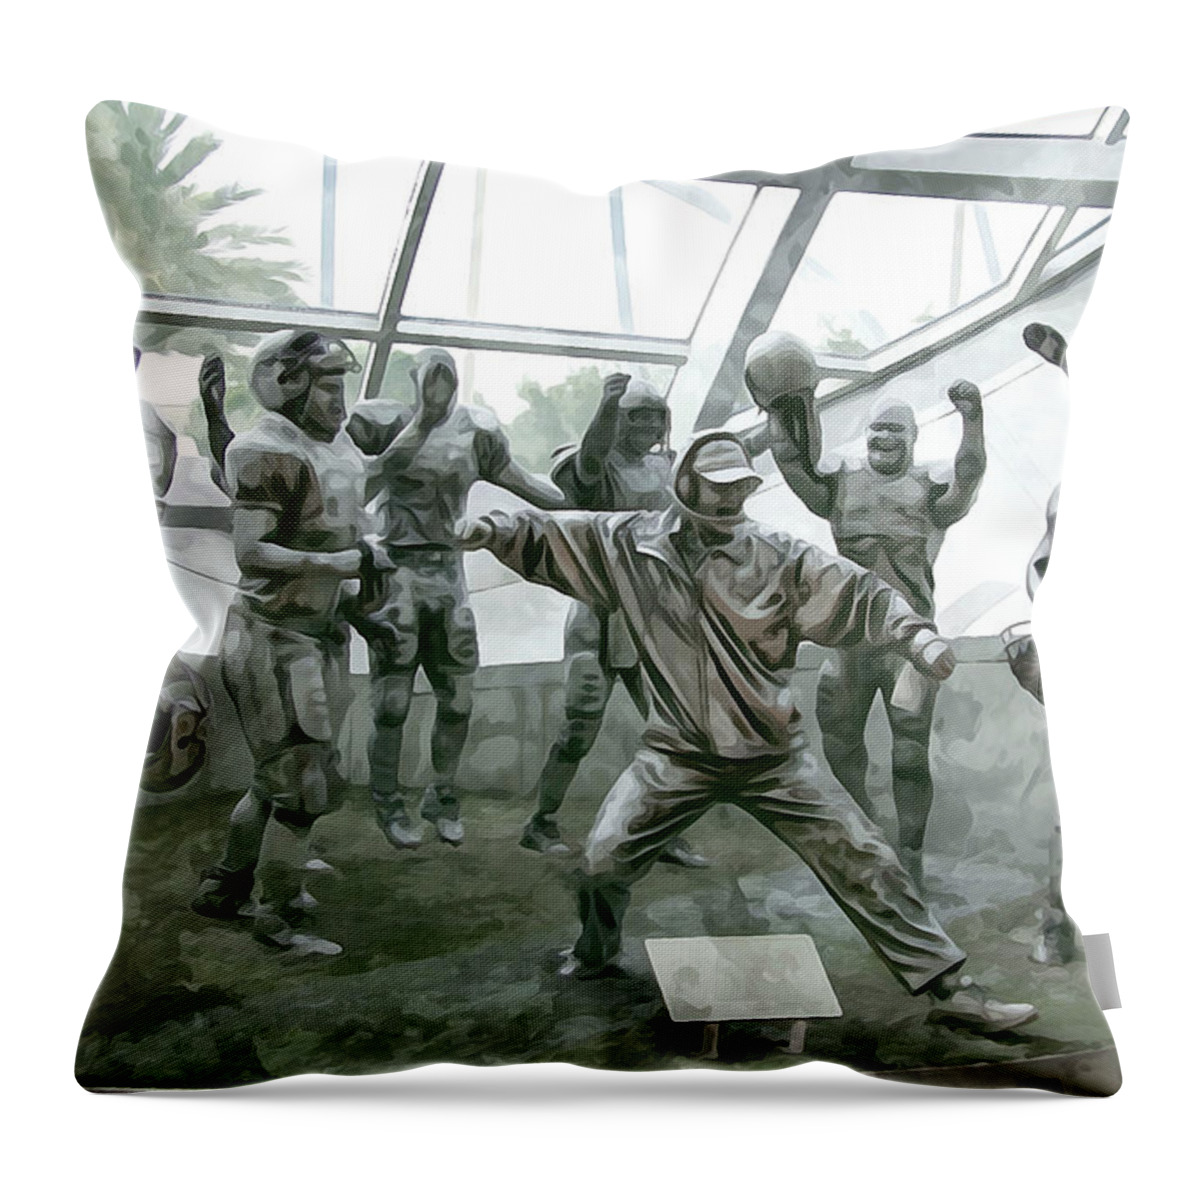 Tampa Bay Throw Pillow featuring the digital art First Championship by Chauncy Holmes